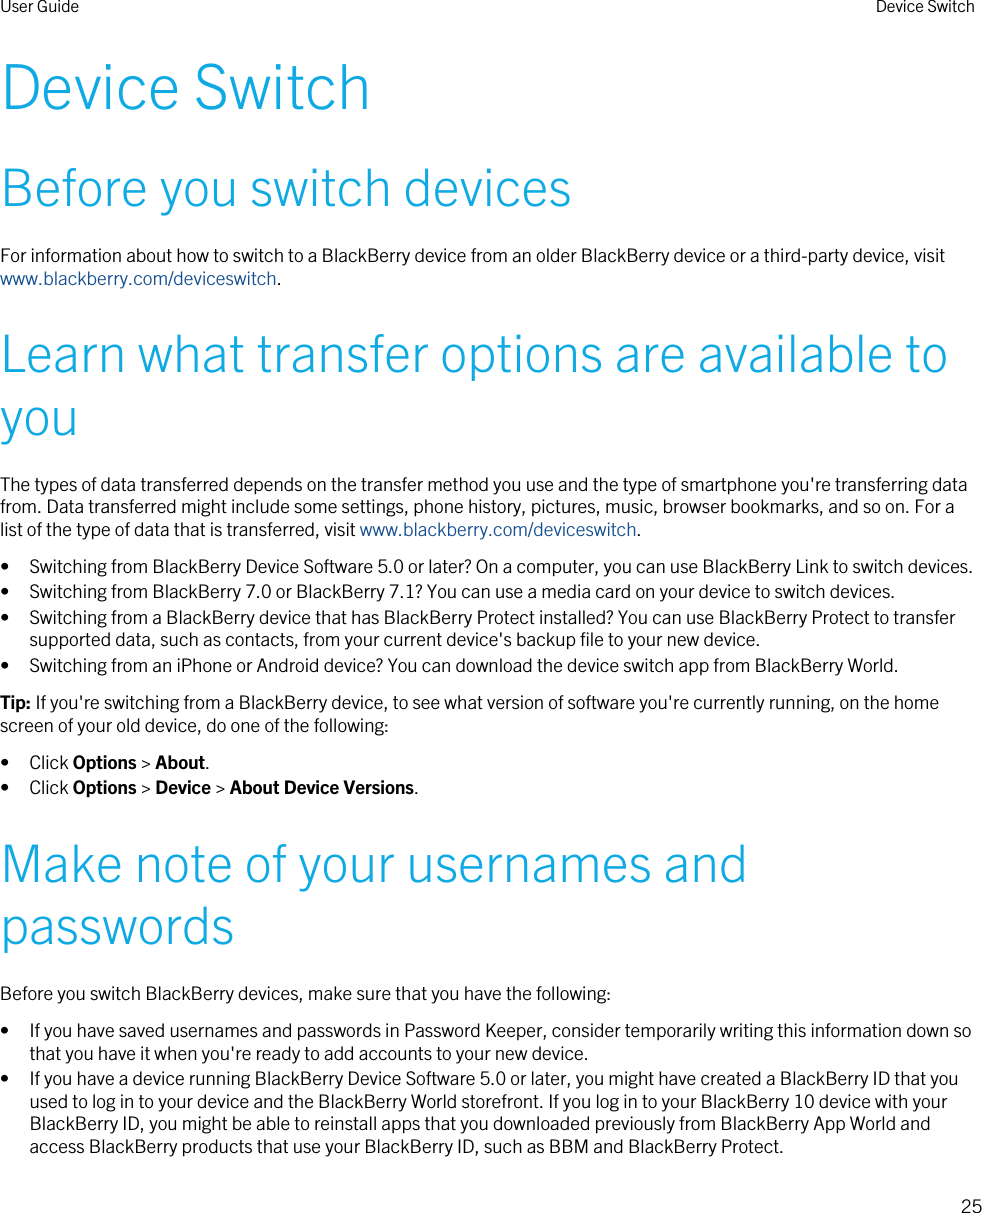 Device SwitchBefore you switch devicesFor information about how to switch to a BlackBerry device from an older BlackBerry device or a third-party device, visit www.blackberry.com/deviceswitch.Learn what transfer options are available to youThe types of data transferred depends on the transfer method you use and the type of smartphone you&apos;re transferring data from. Data transferred might include some settings, phone history, pictures, music, browser bookmarks, and so on. For a list of the type of data that is transferred, visit www.blackberry.com/deviceswitch.• Switching from BlackBerry Device Software 5.0 or later? On a computer, you can use BlackBerry Link to switch devices.• Switching from BlackBerry 7.0 or BlackBerry 7.1? You can use a media card on your device to switch devices.• Switching from a BlackBerry device that has BlackBerry Protect installed? You can use BlackBerry Protect to transfer supported data, such as contacts, from your current device&apos;s backup file to your new device.• Switching from an iPhone or Android device? You can download the device switch app from BlackBerry World.Tip: If you&apos;re switching from a BlackBerry device, to see what version of software you&apos;re currently running, on the home screen of your old device, do one of the following:• Click Options &gt; About.• Click Options &gt; Device &gt; About Device Versions.Make note of your usernames and passwordsBefore you switch BlackBerry devices, make sure that you have the following:• If you have saved usernames and passwords in Password Keeper, consider temporarily writing this information down so that you have it when you&apos;re ready to add accounts to your new device.• If you have a device running BlackBerry Device Software 5.0 or later, you might have created a BlackBerry ID that you used to log in to your device and the BlackBerry World storefront. If you log in to your BlackBerry 10 device with your BlackBerry ID, you might be able to reinstall apps that you downloaded previously from BlackBerry App World and access BlackBerry products that use your BlackBerry ID, such as BBM and BlackBerry Protect.User Guide Device Switch25 